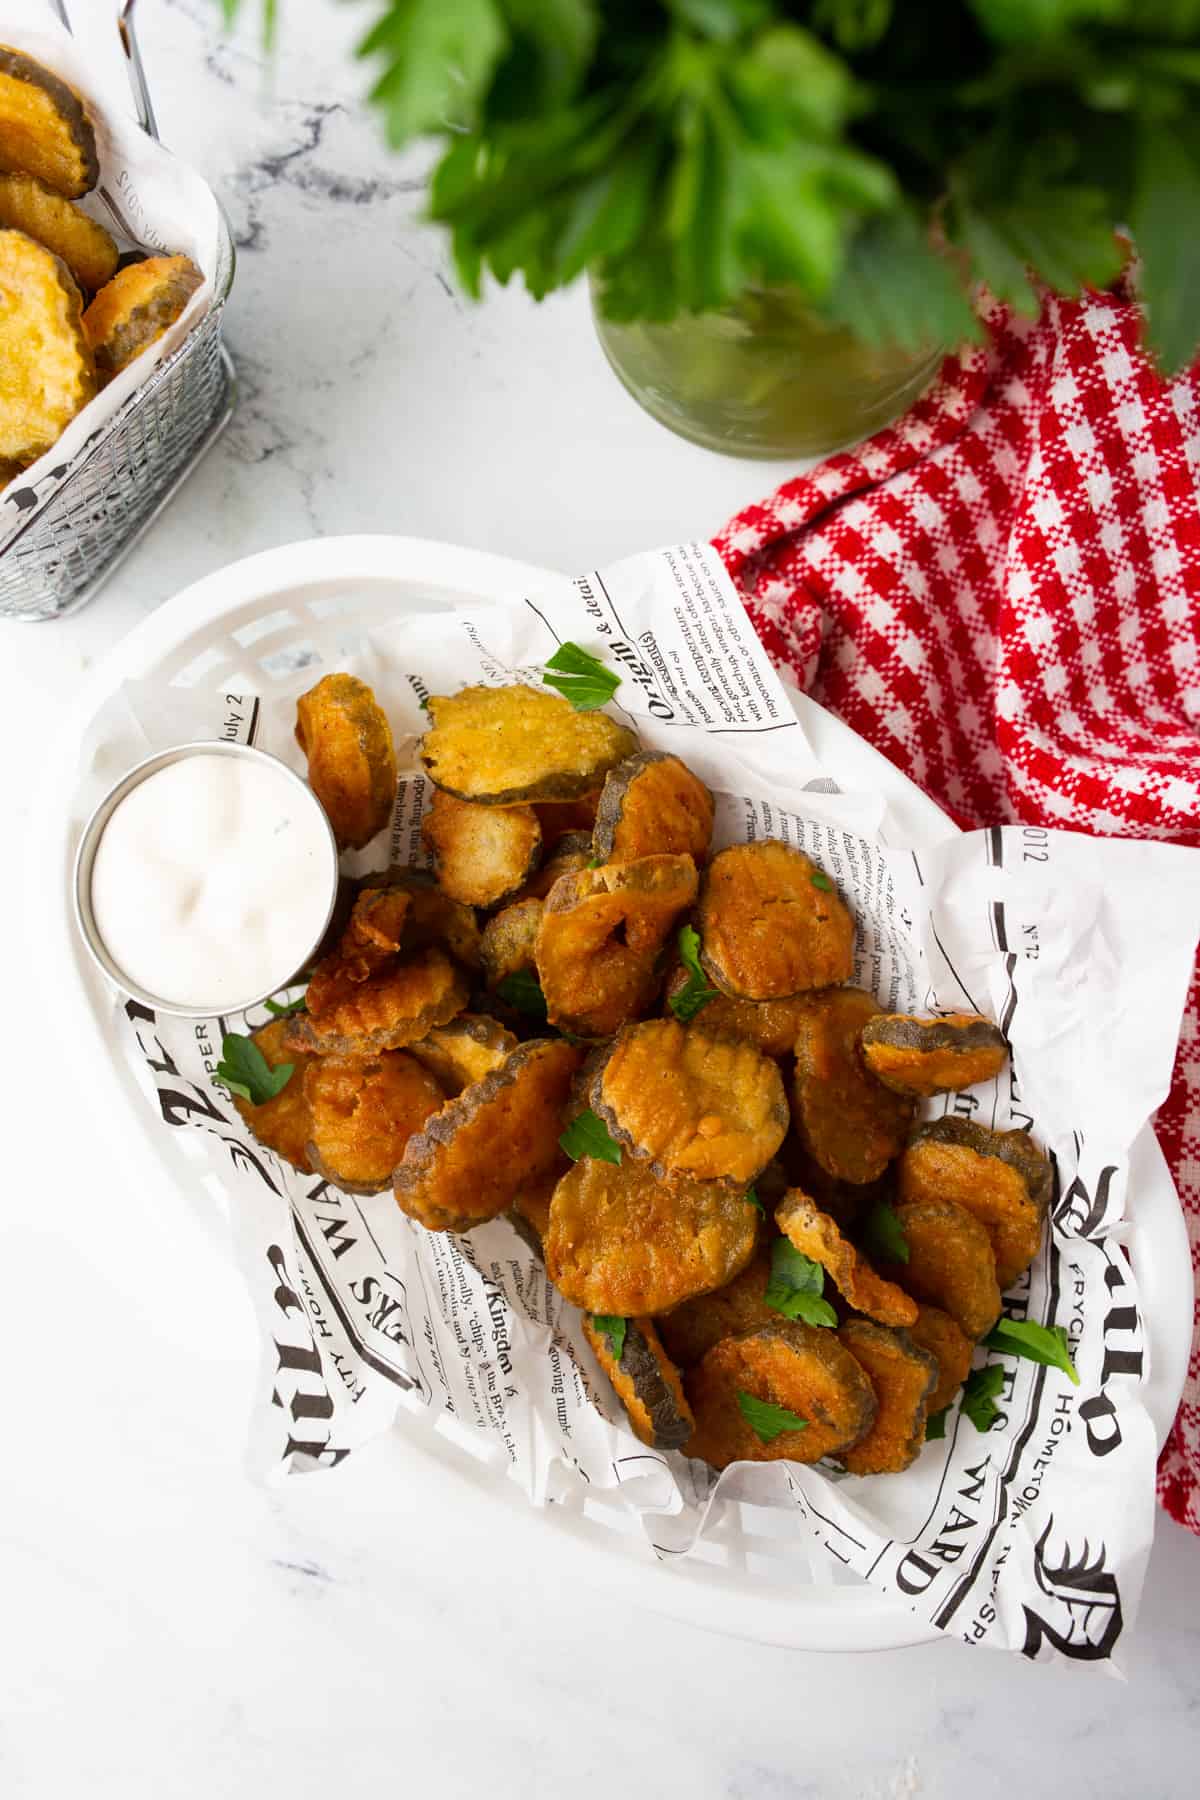 A basket of deep fried pickle chips served with ranch and garnished with parsley.